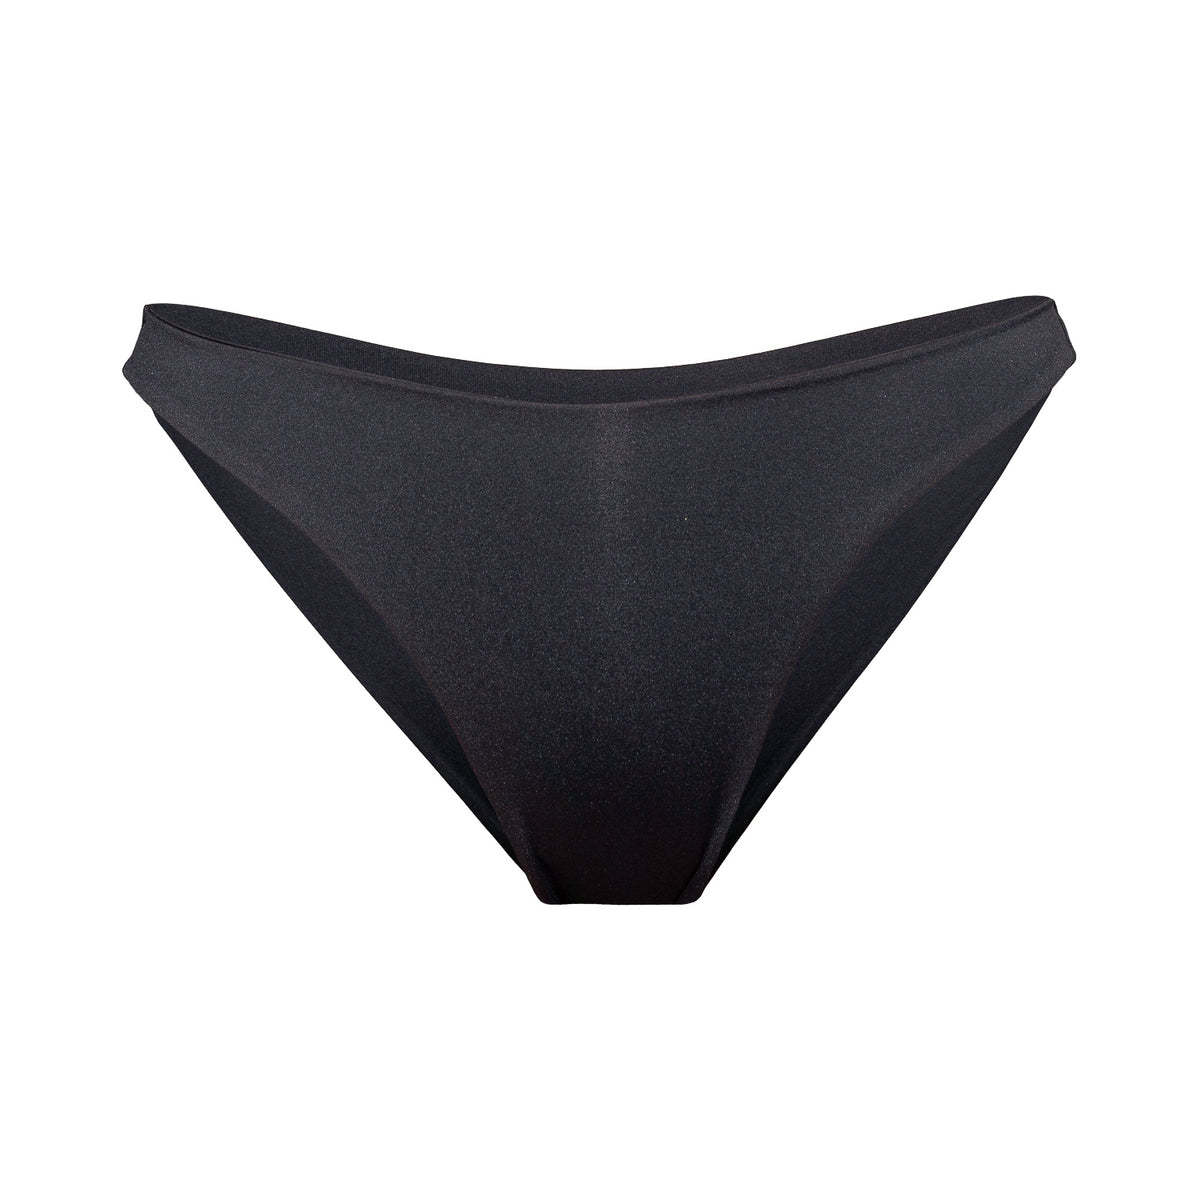 Elegant black classic bikini bottoms with an extra soft touch, fine lining and thick feel. Made sustainably and ethically in Europe from finest polyamide. Perfected fit for every body shape.